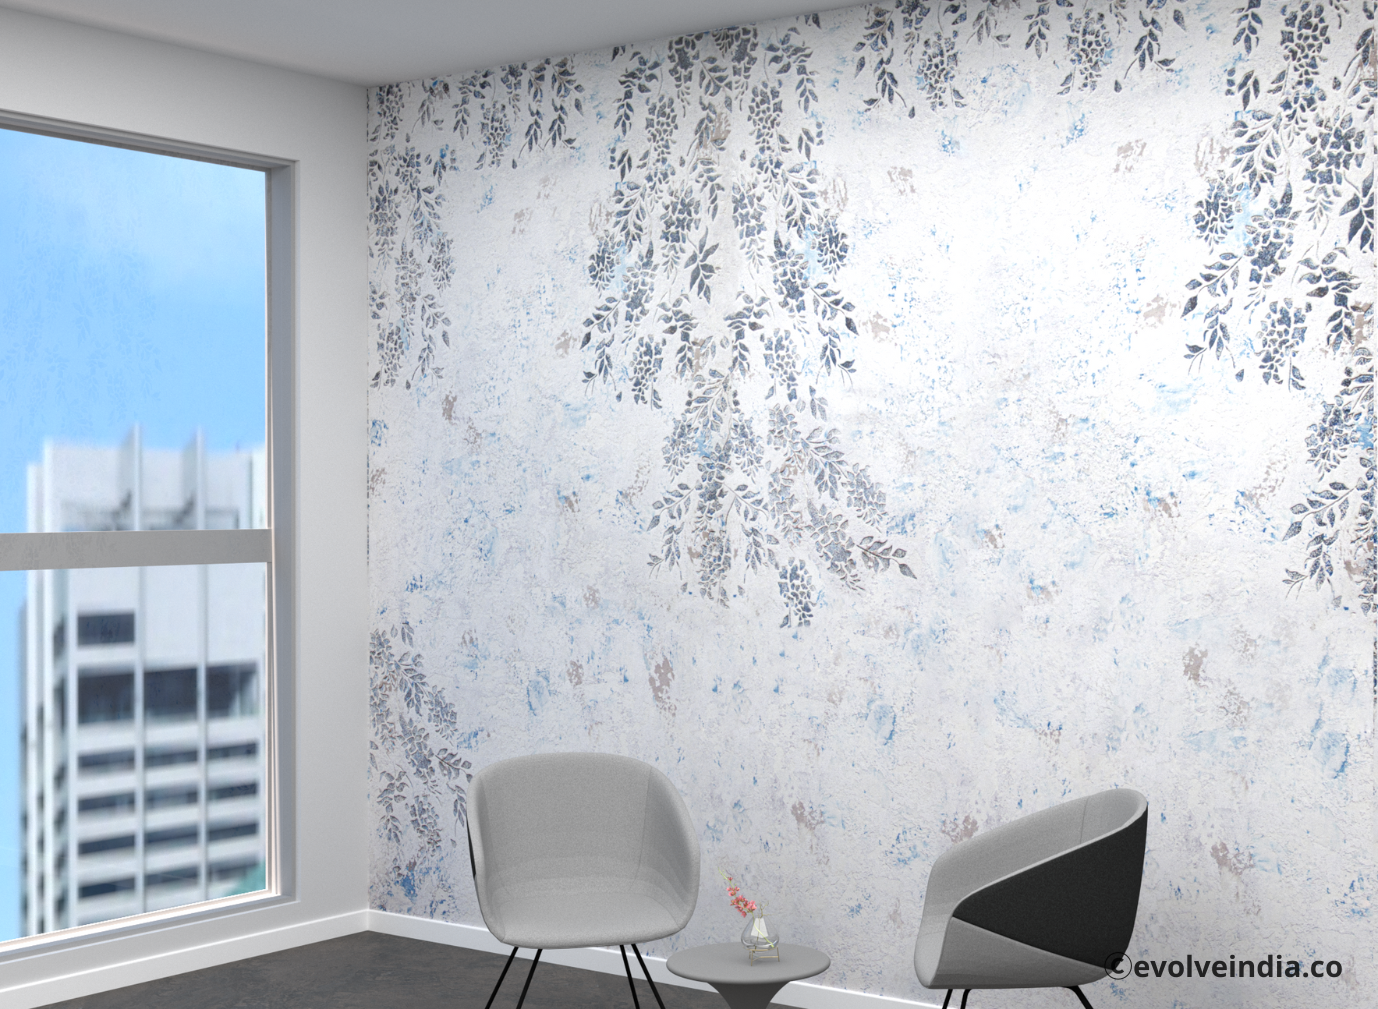 Frosty Blue Duo Artistique Fusion Lobby Wall By Evolve India